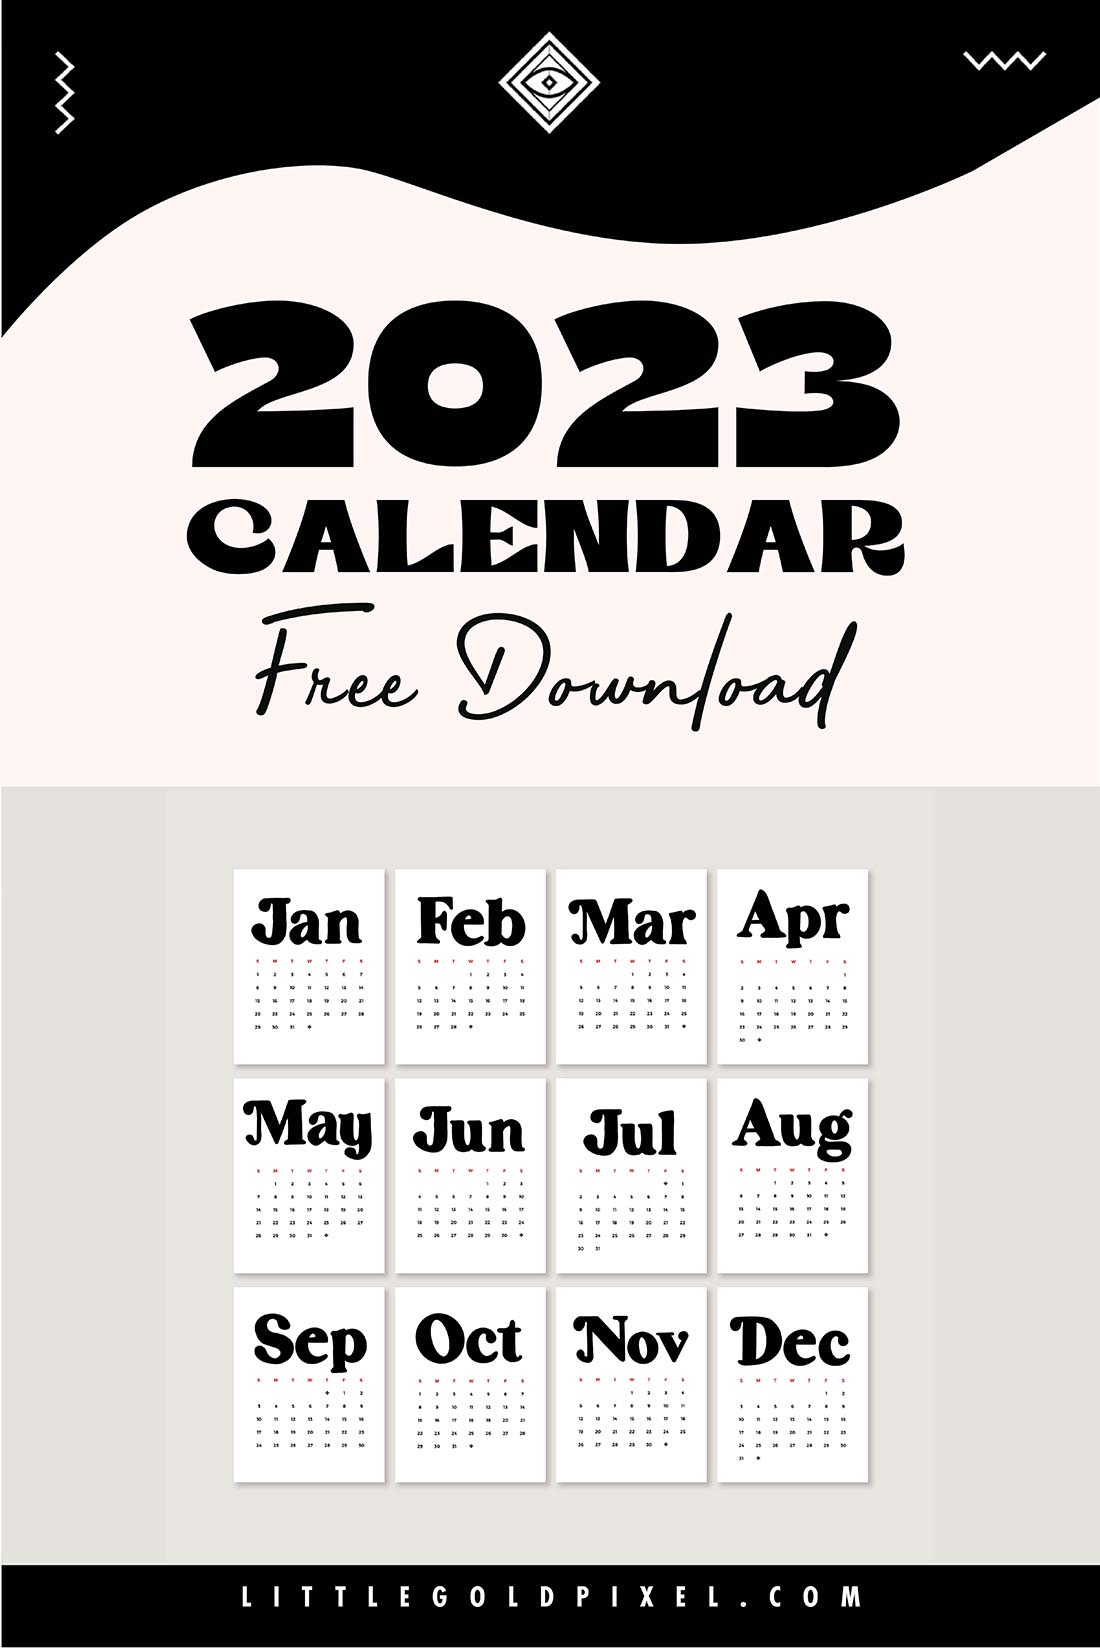 Free Printable 2023 Calendar • Little Gold Pixel • Free PDF download of the 2023 calendar for you to print out and enjoy!